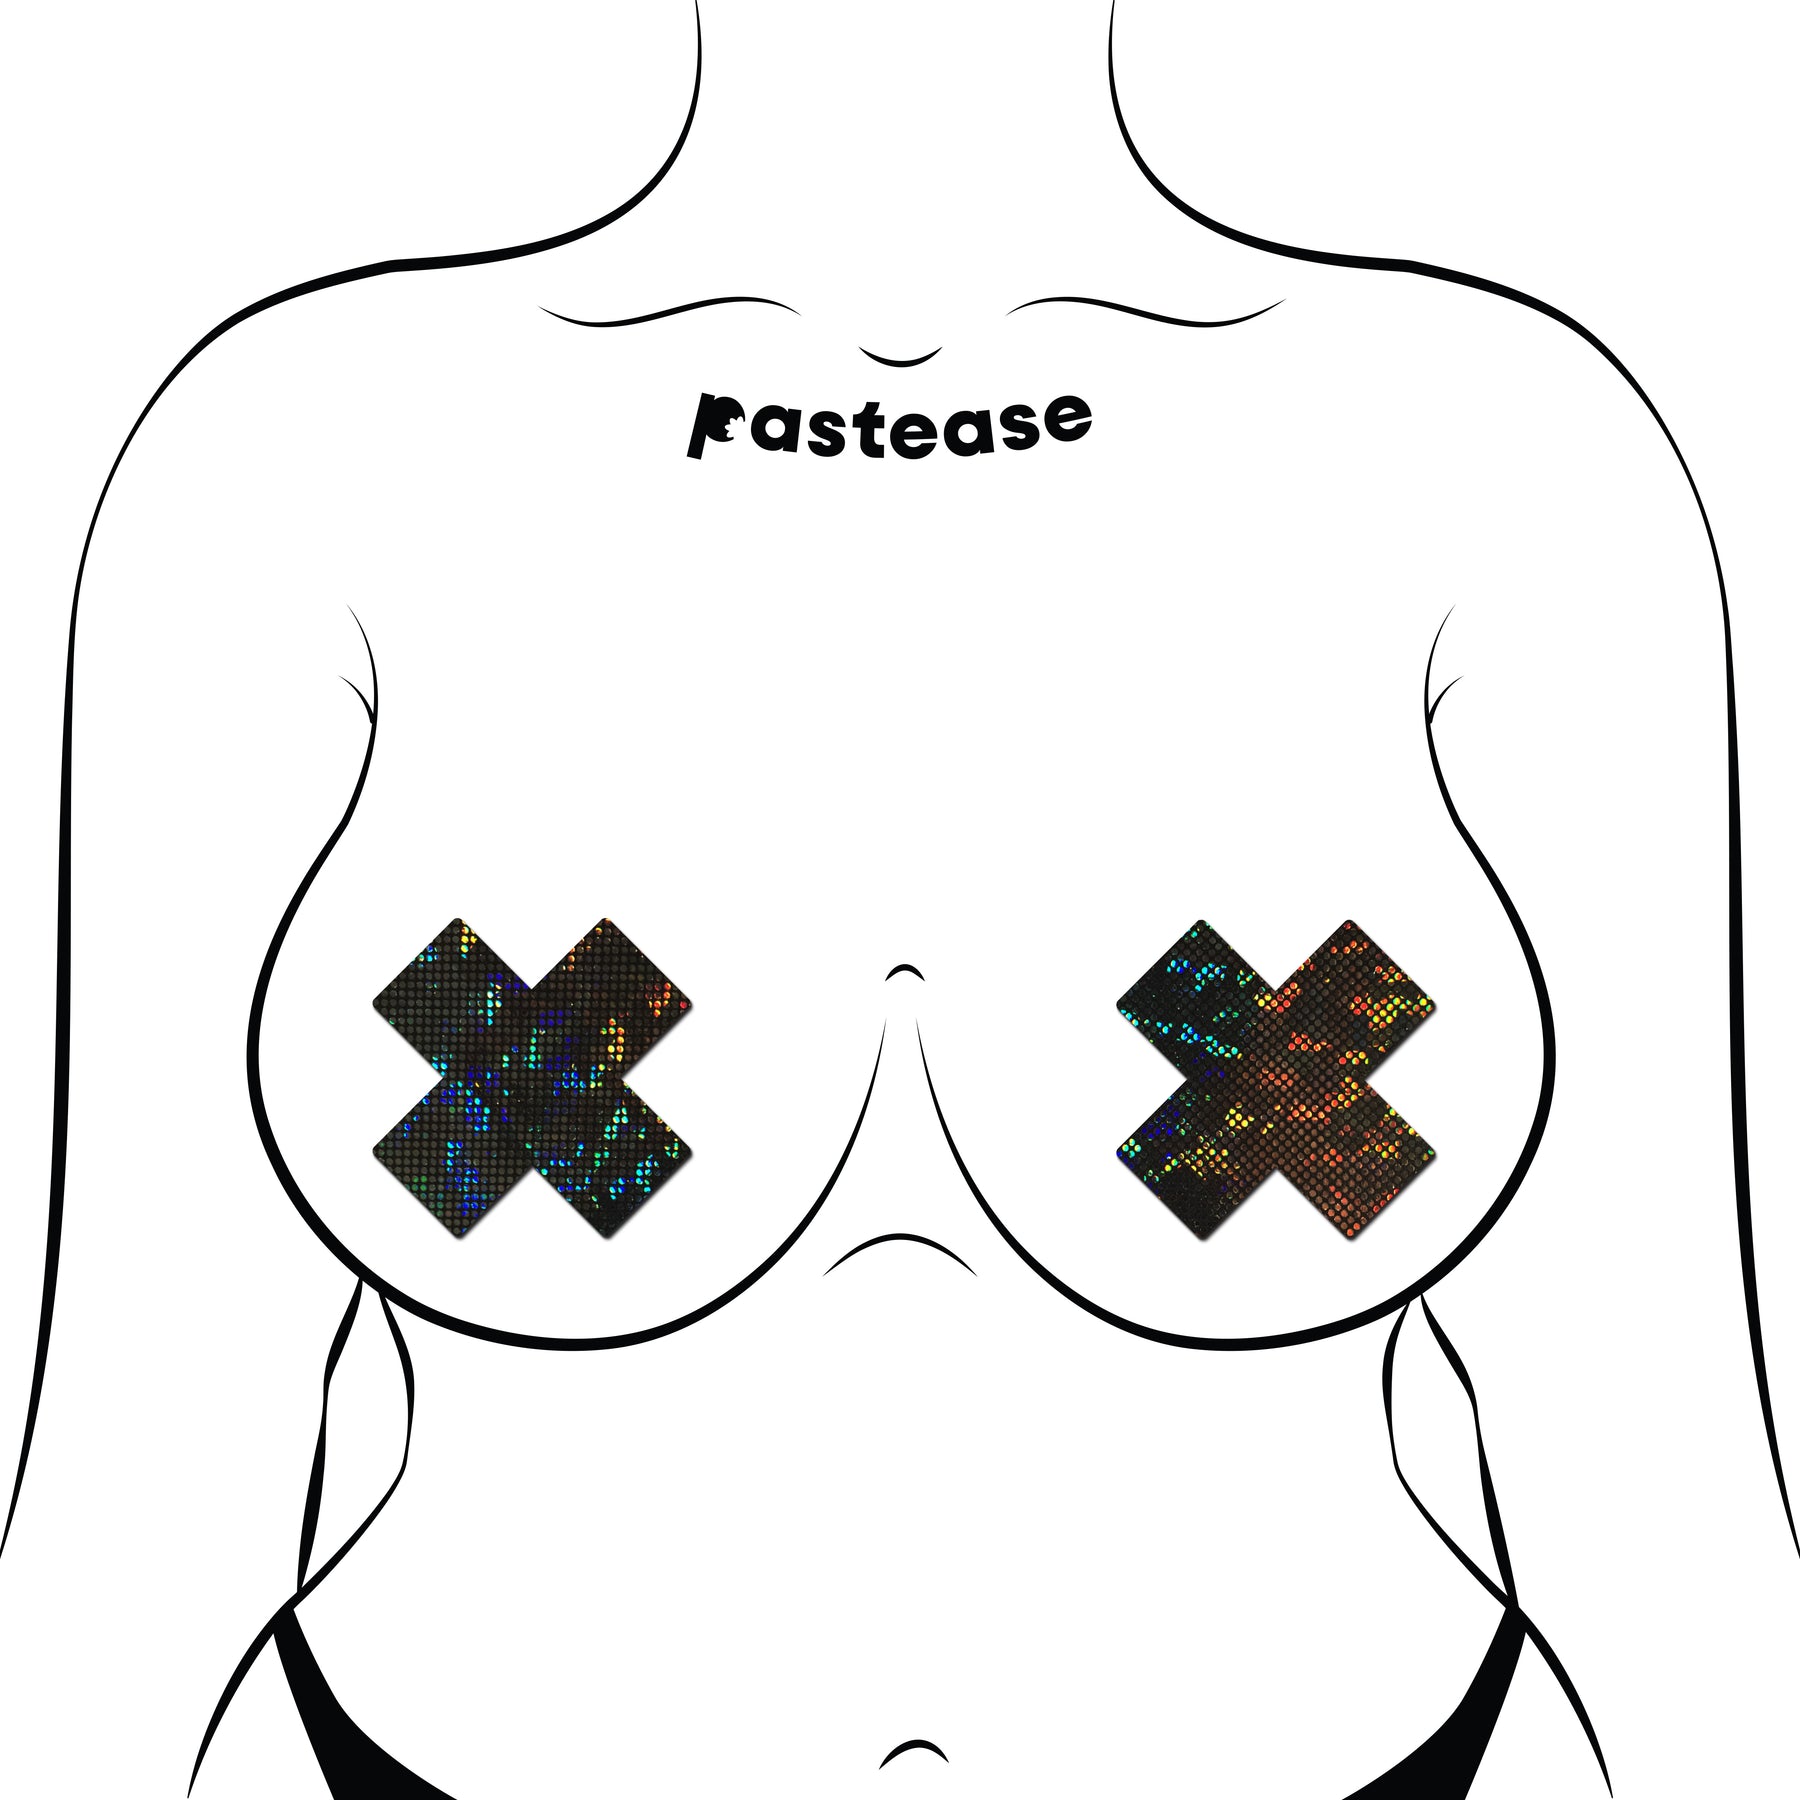 Plus X: Shattered Glass Disco Ball Glitter Cross Nipple Pasties by Pastease®